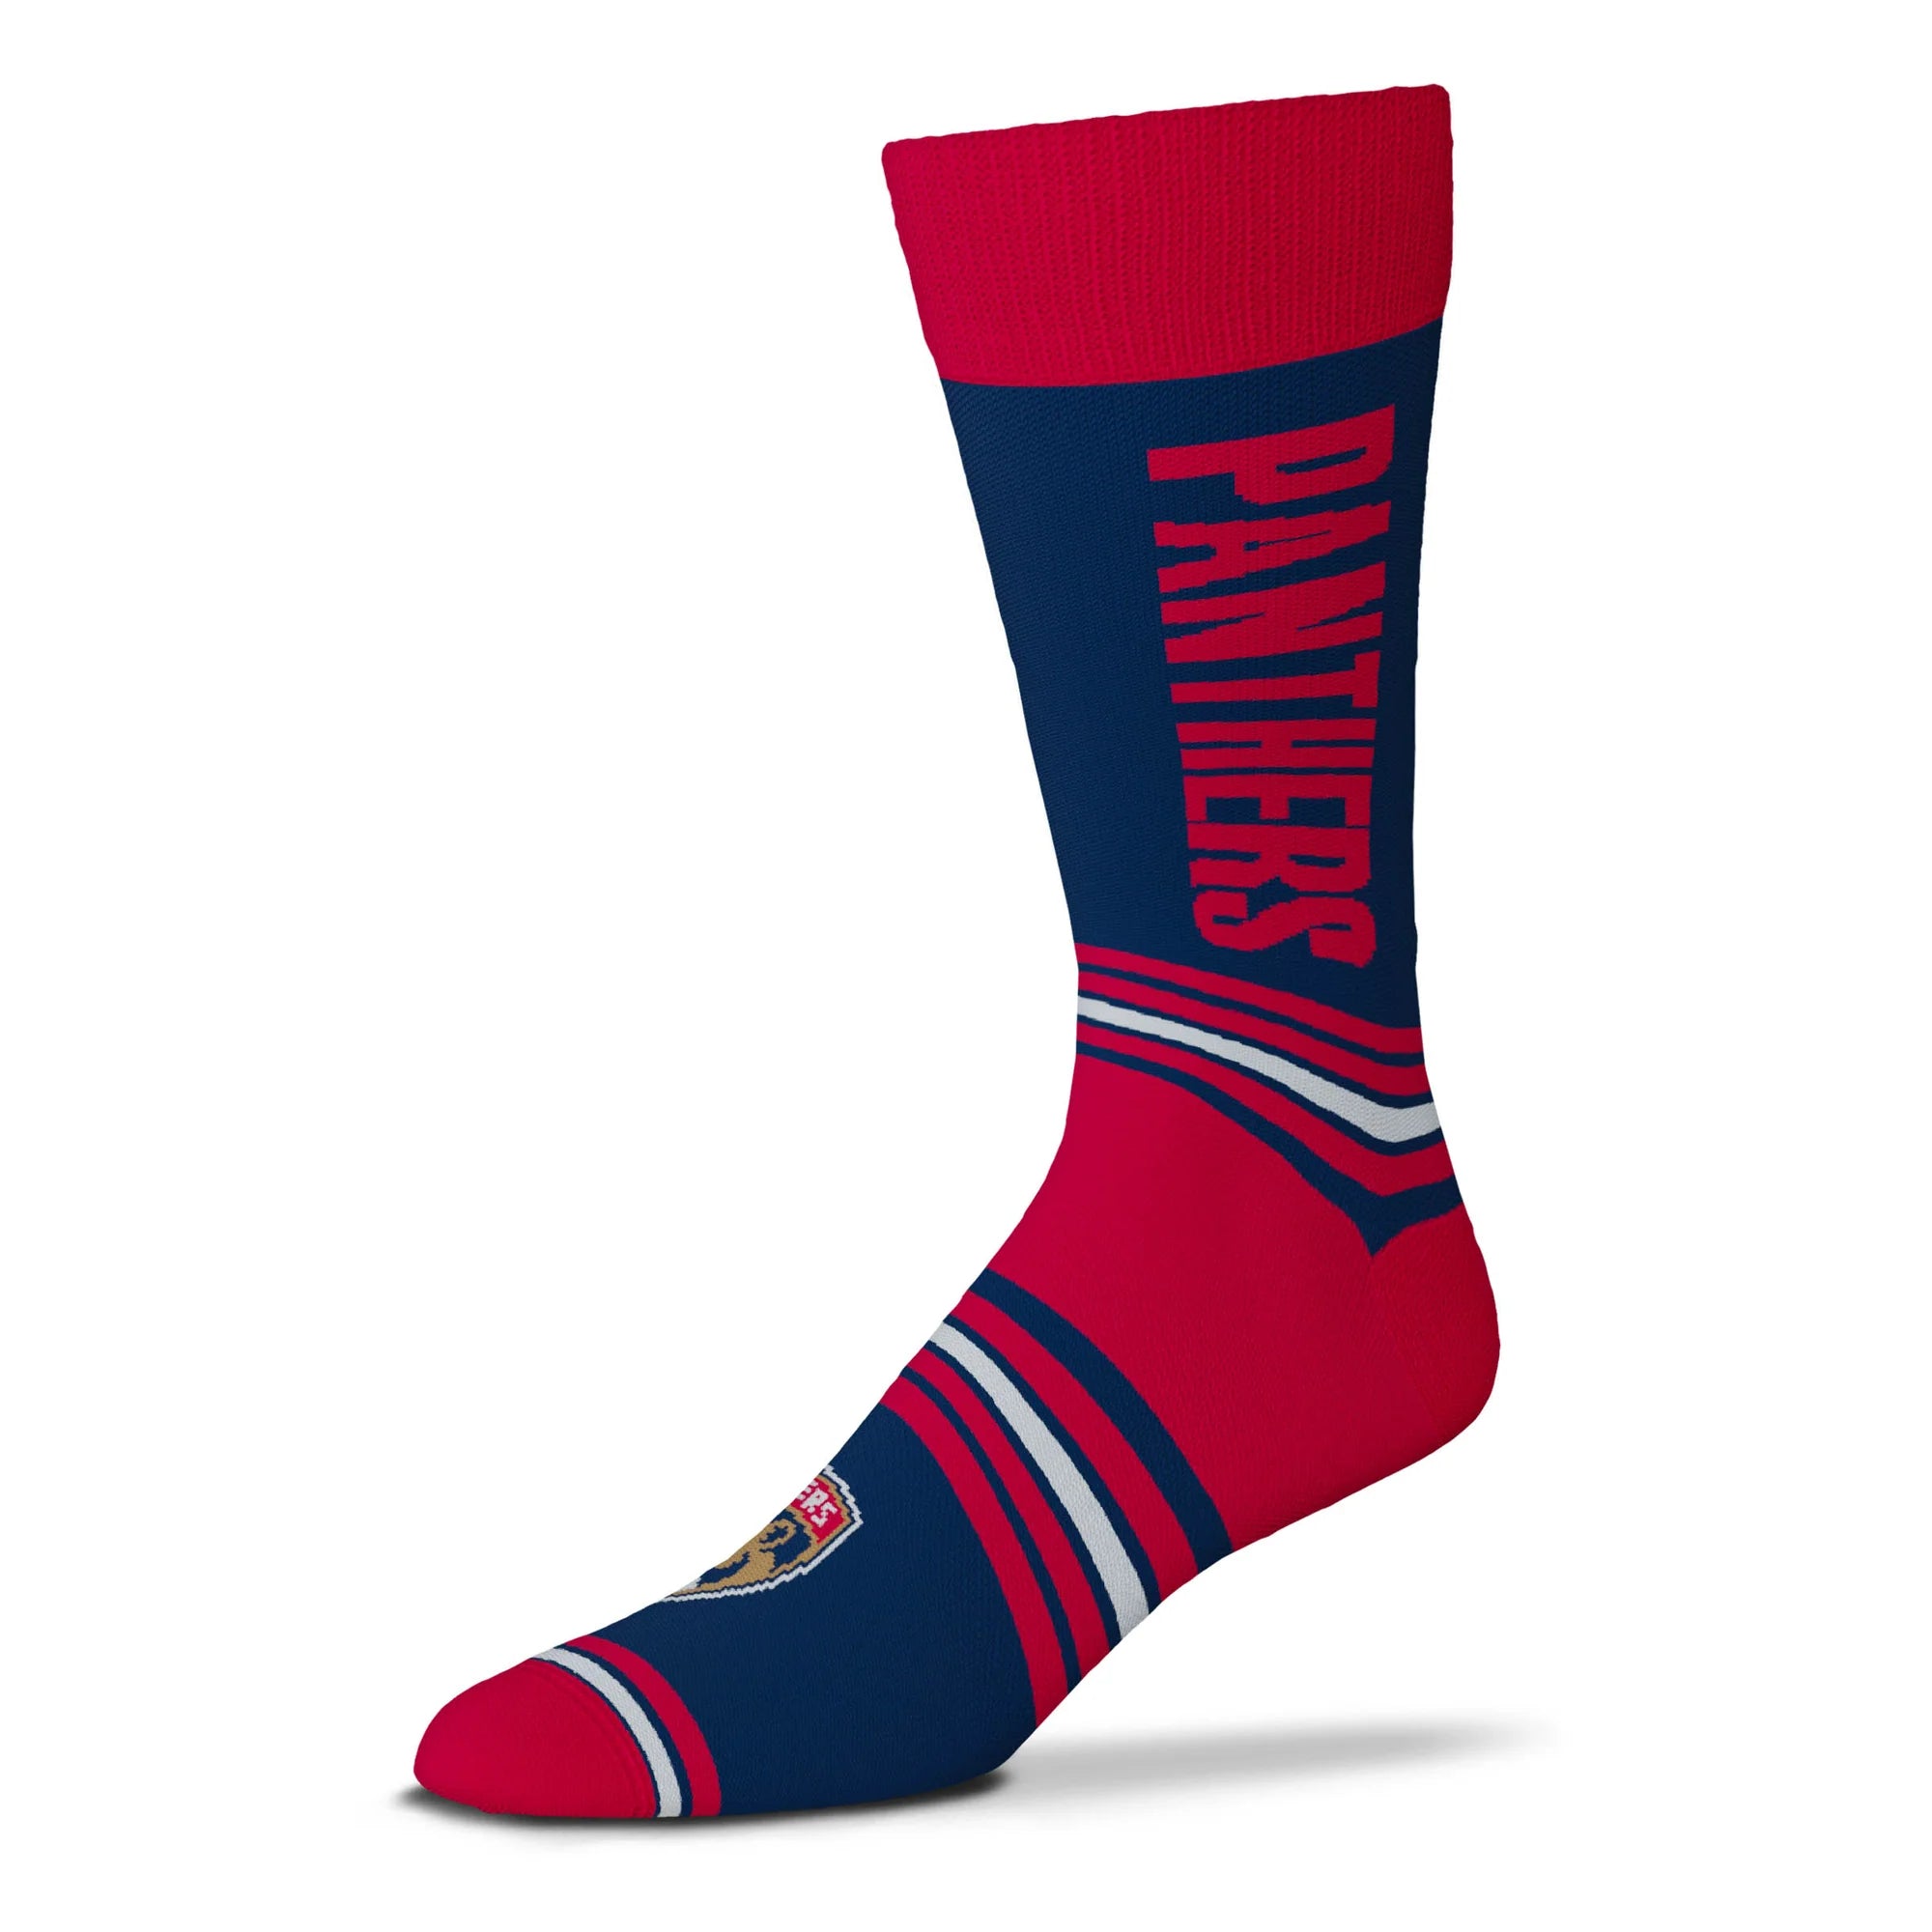 Florida Panthers For Bare Feet OSFM Crew Socks - Blue/Red